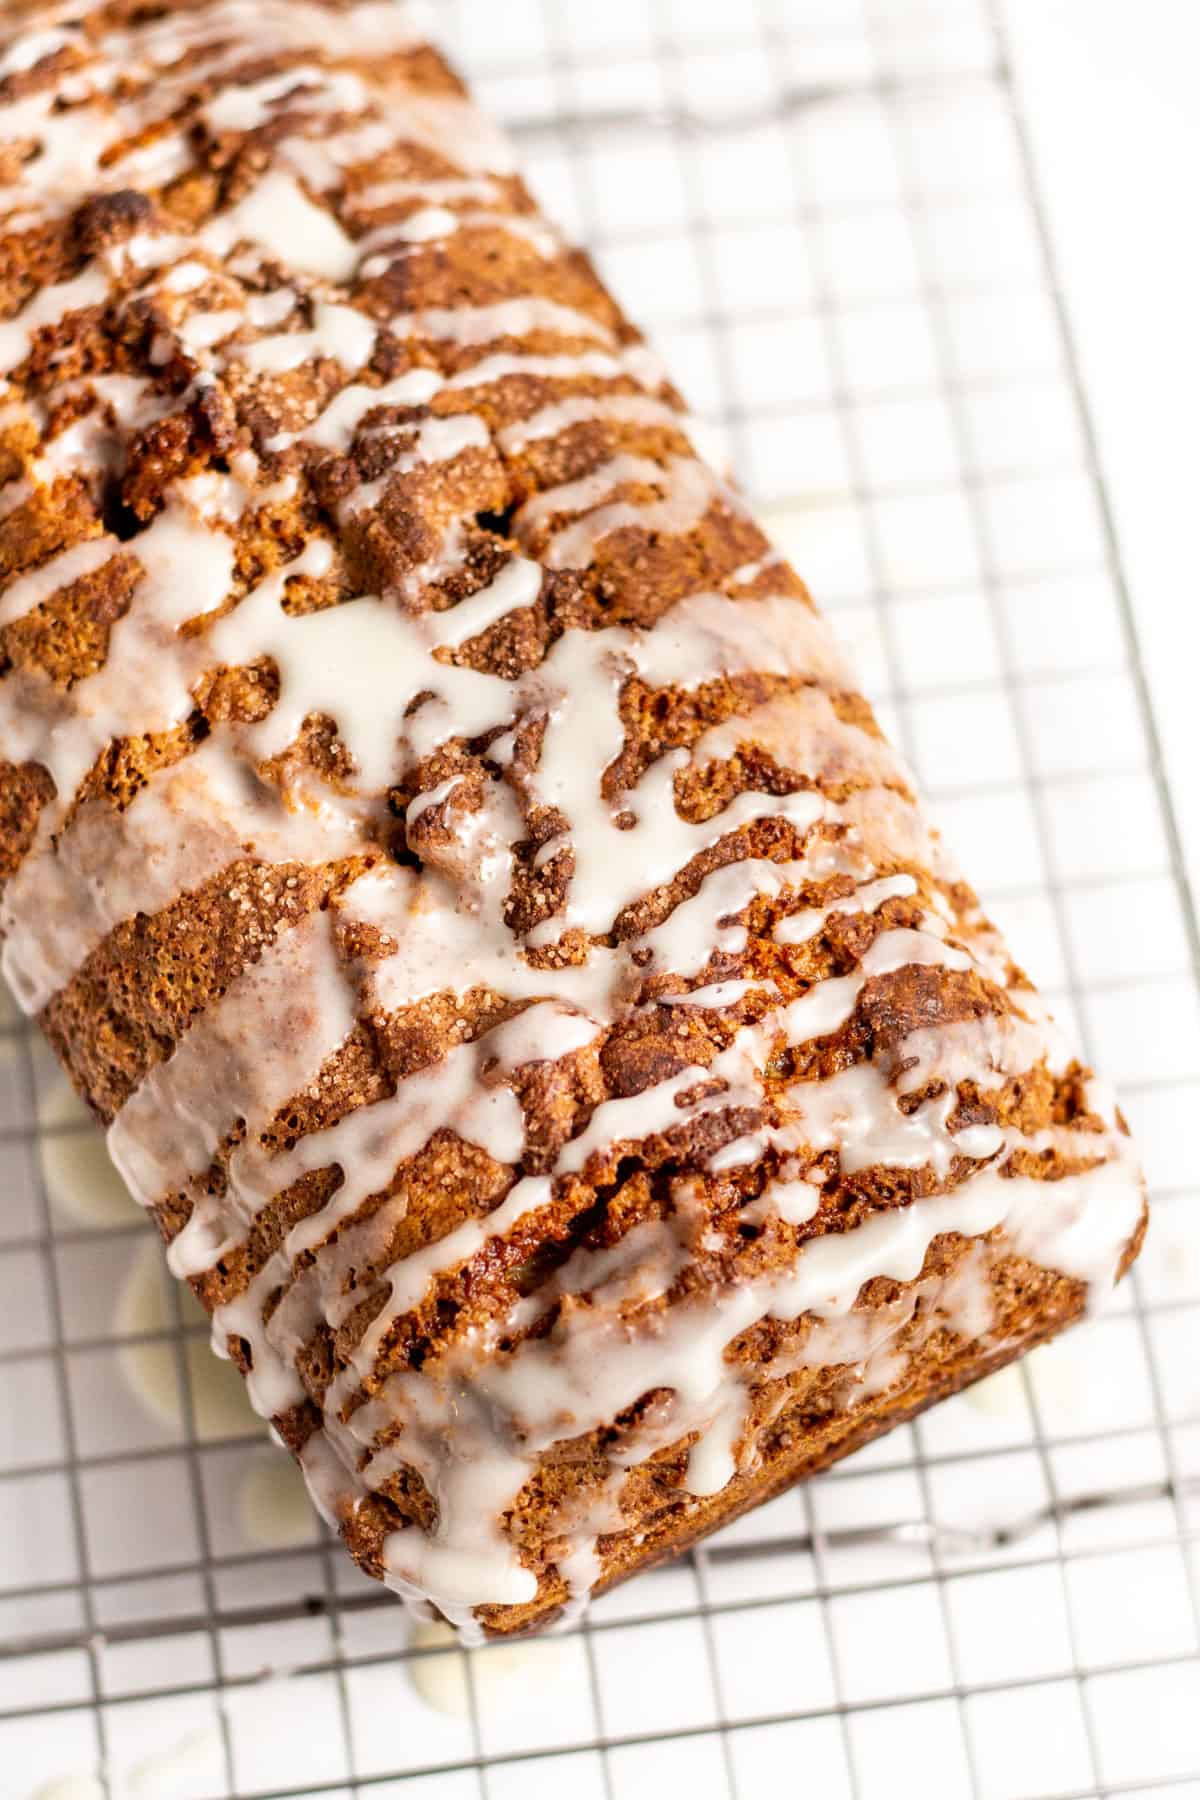 cinnamon swirl bread loaf with a cream glaze on top sitting on a wire cooling rack